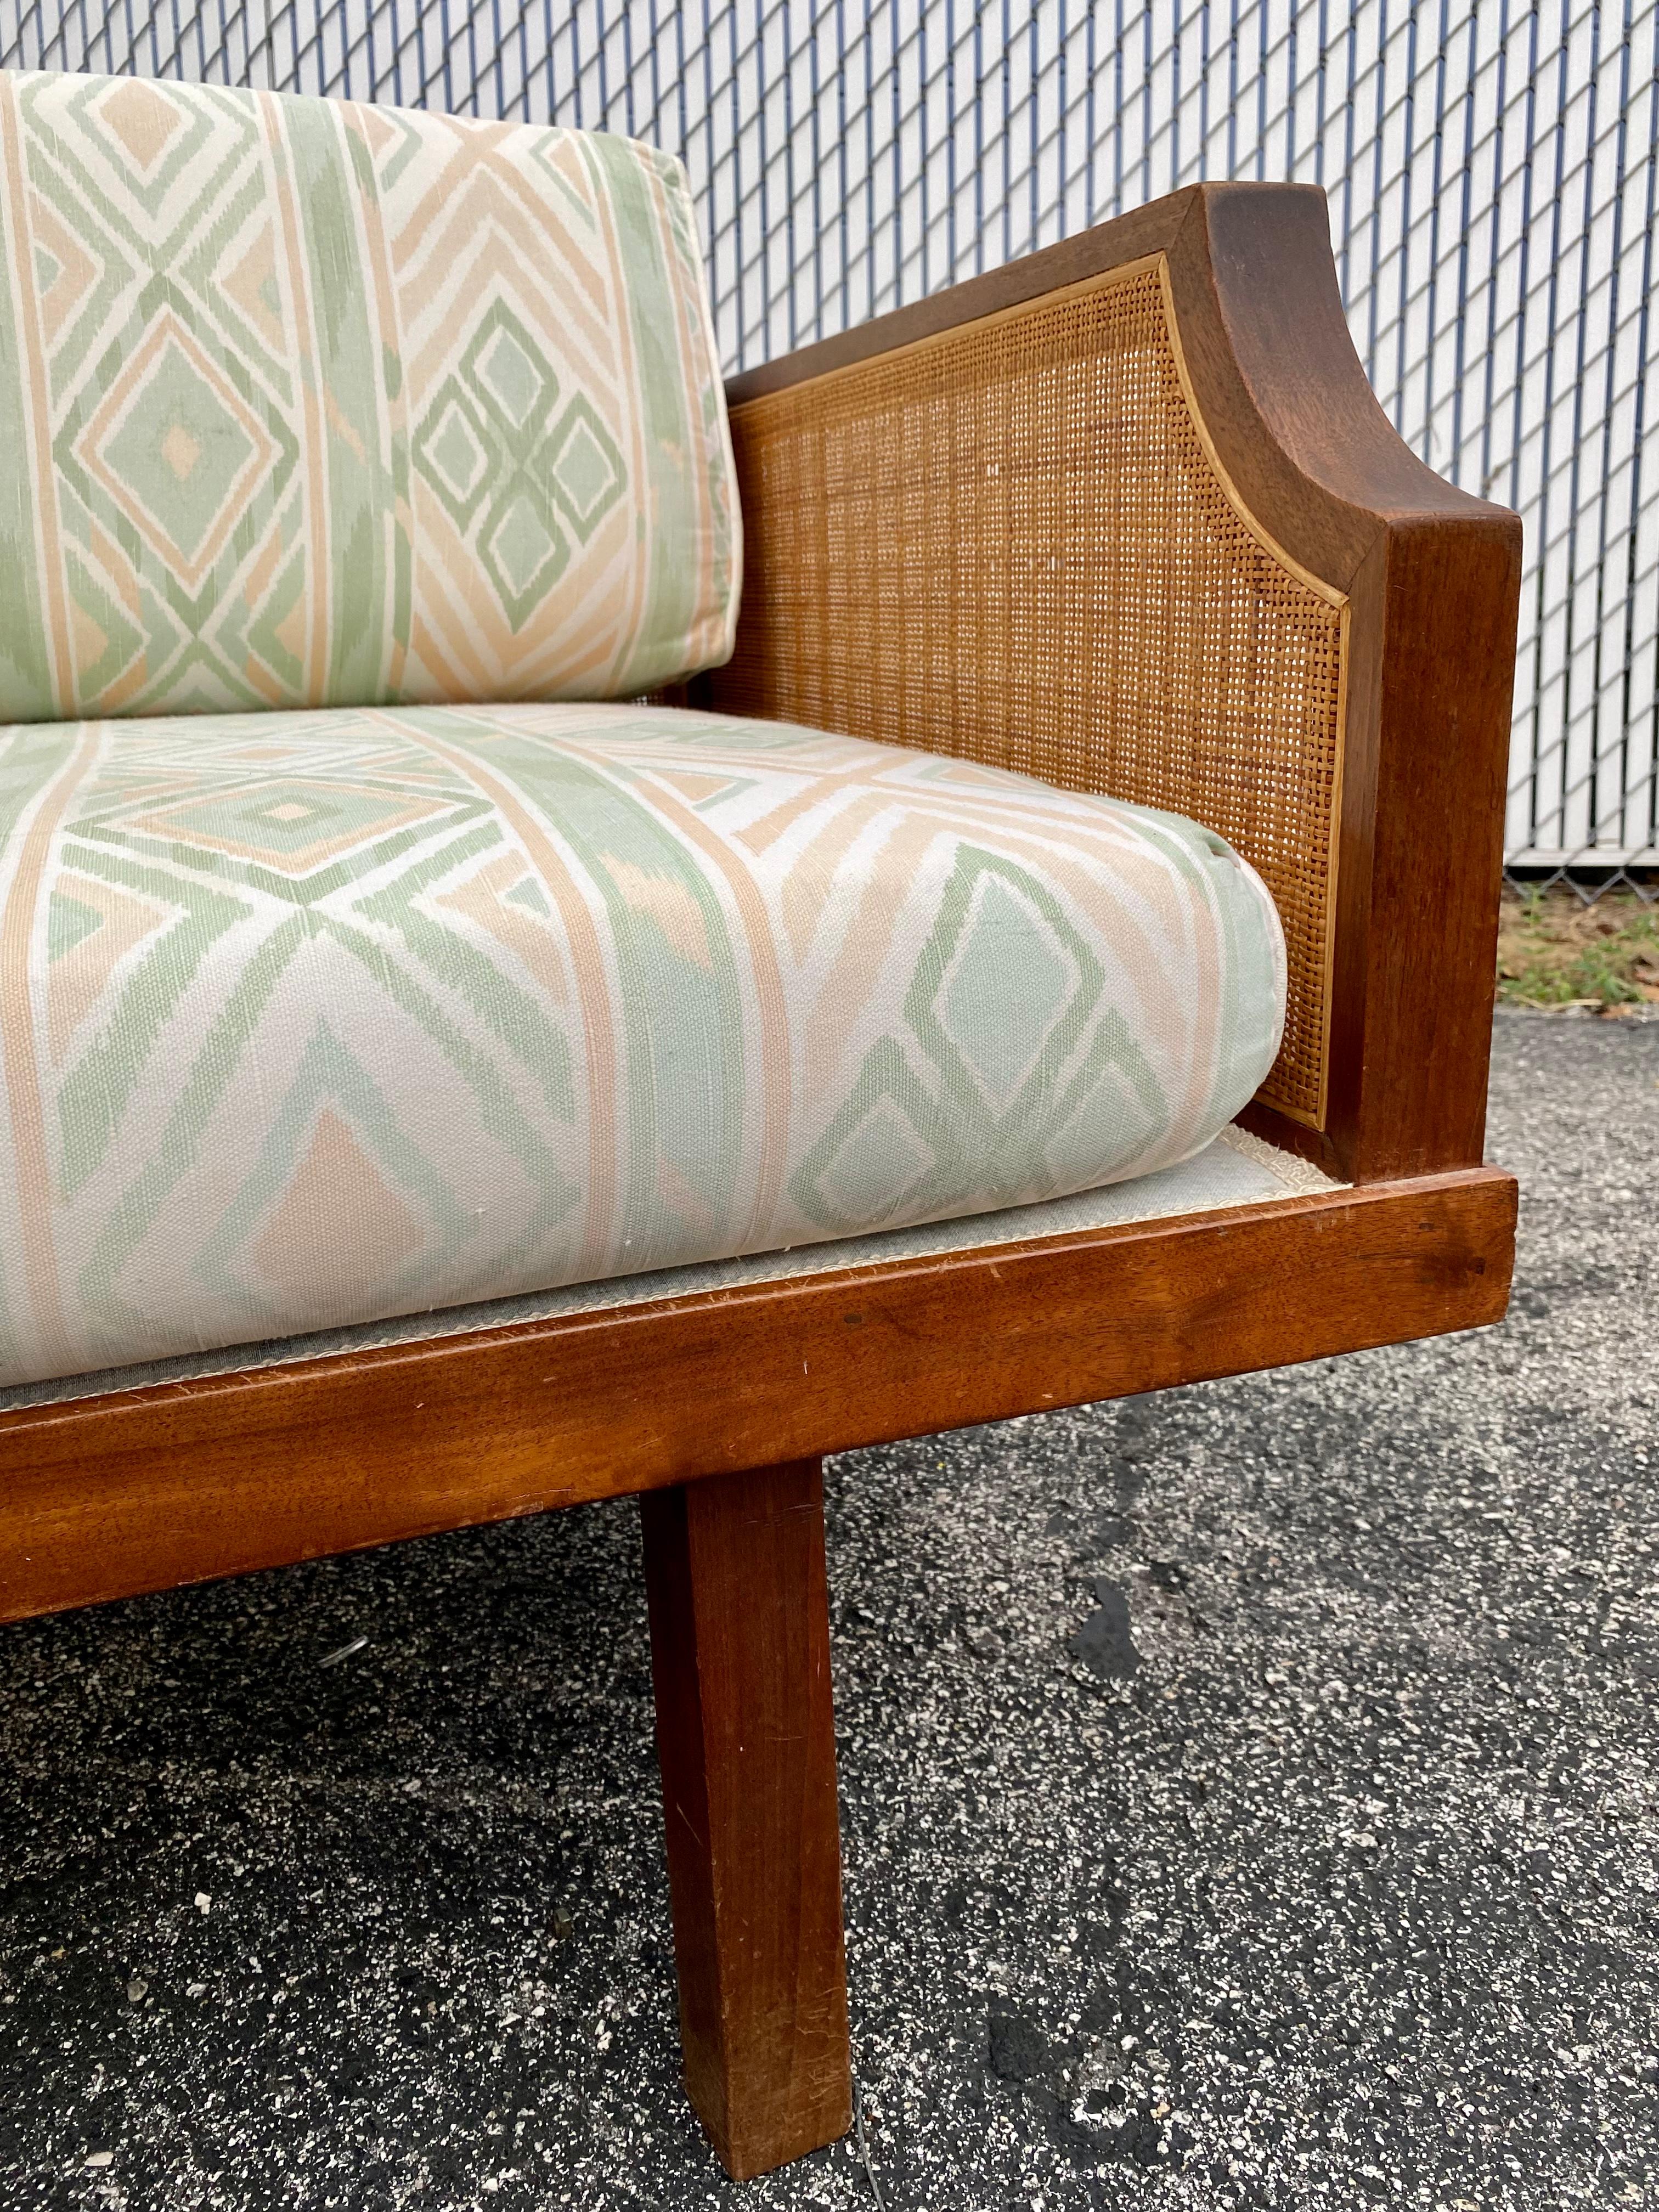 Mid-20th Century 1960s Mid-Century Teak Cane Sofa or Daybed